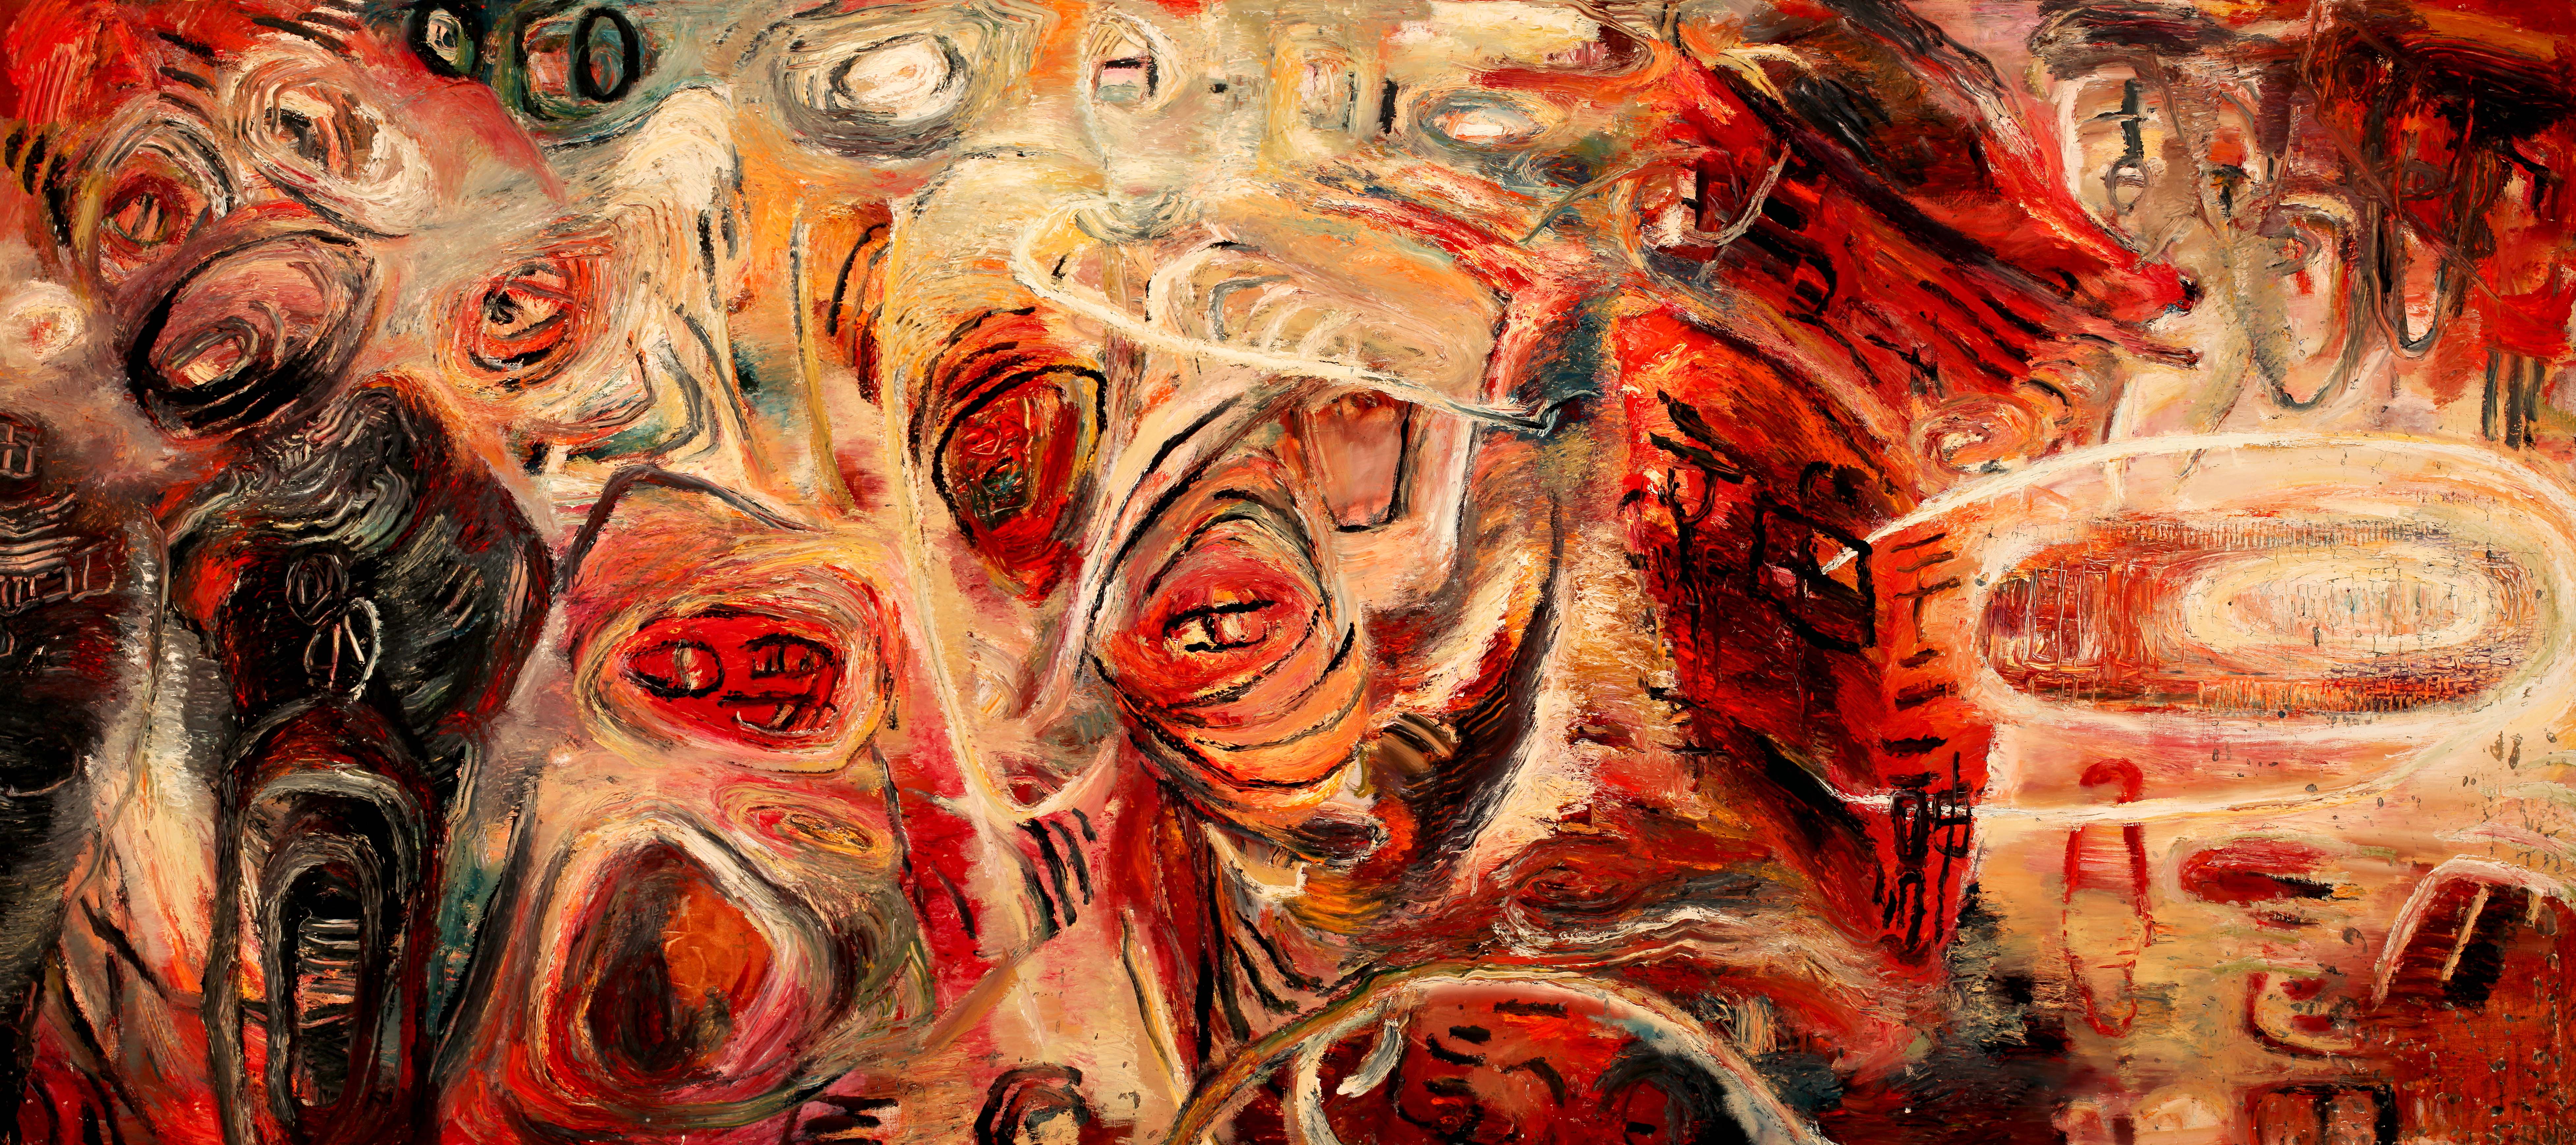 River Dancing Series II, 68 x 164 inches, Oil on Canvas, 1991